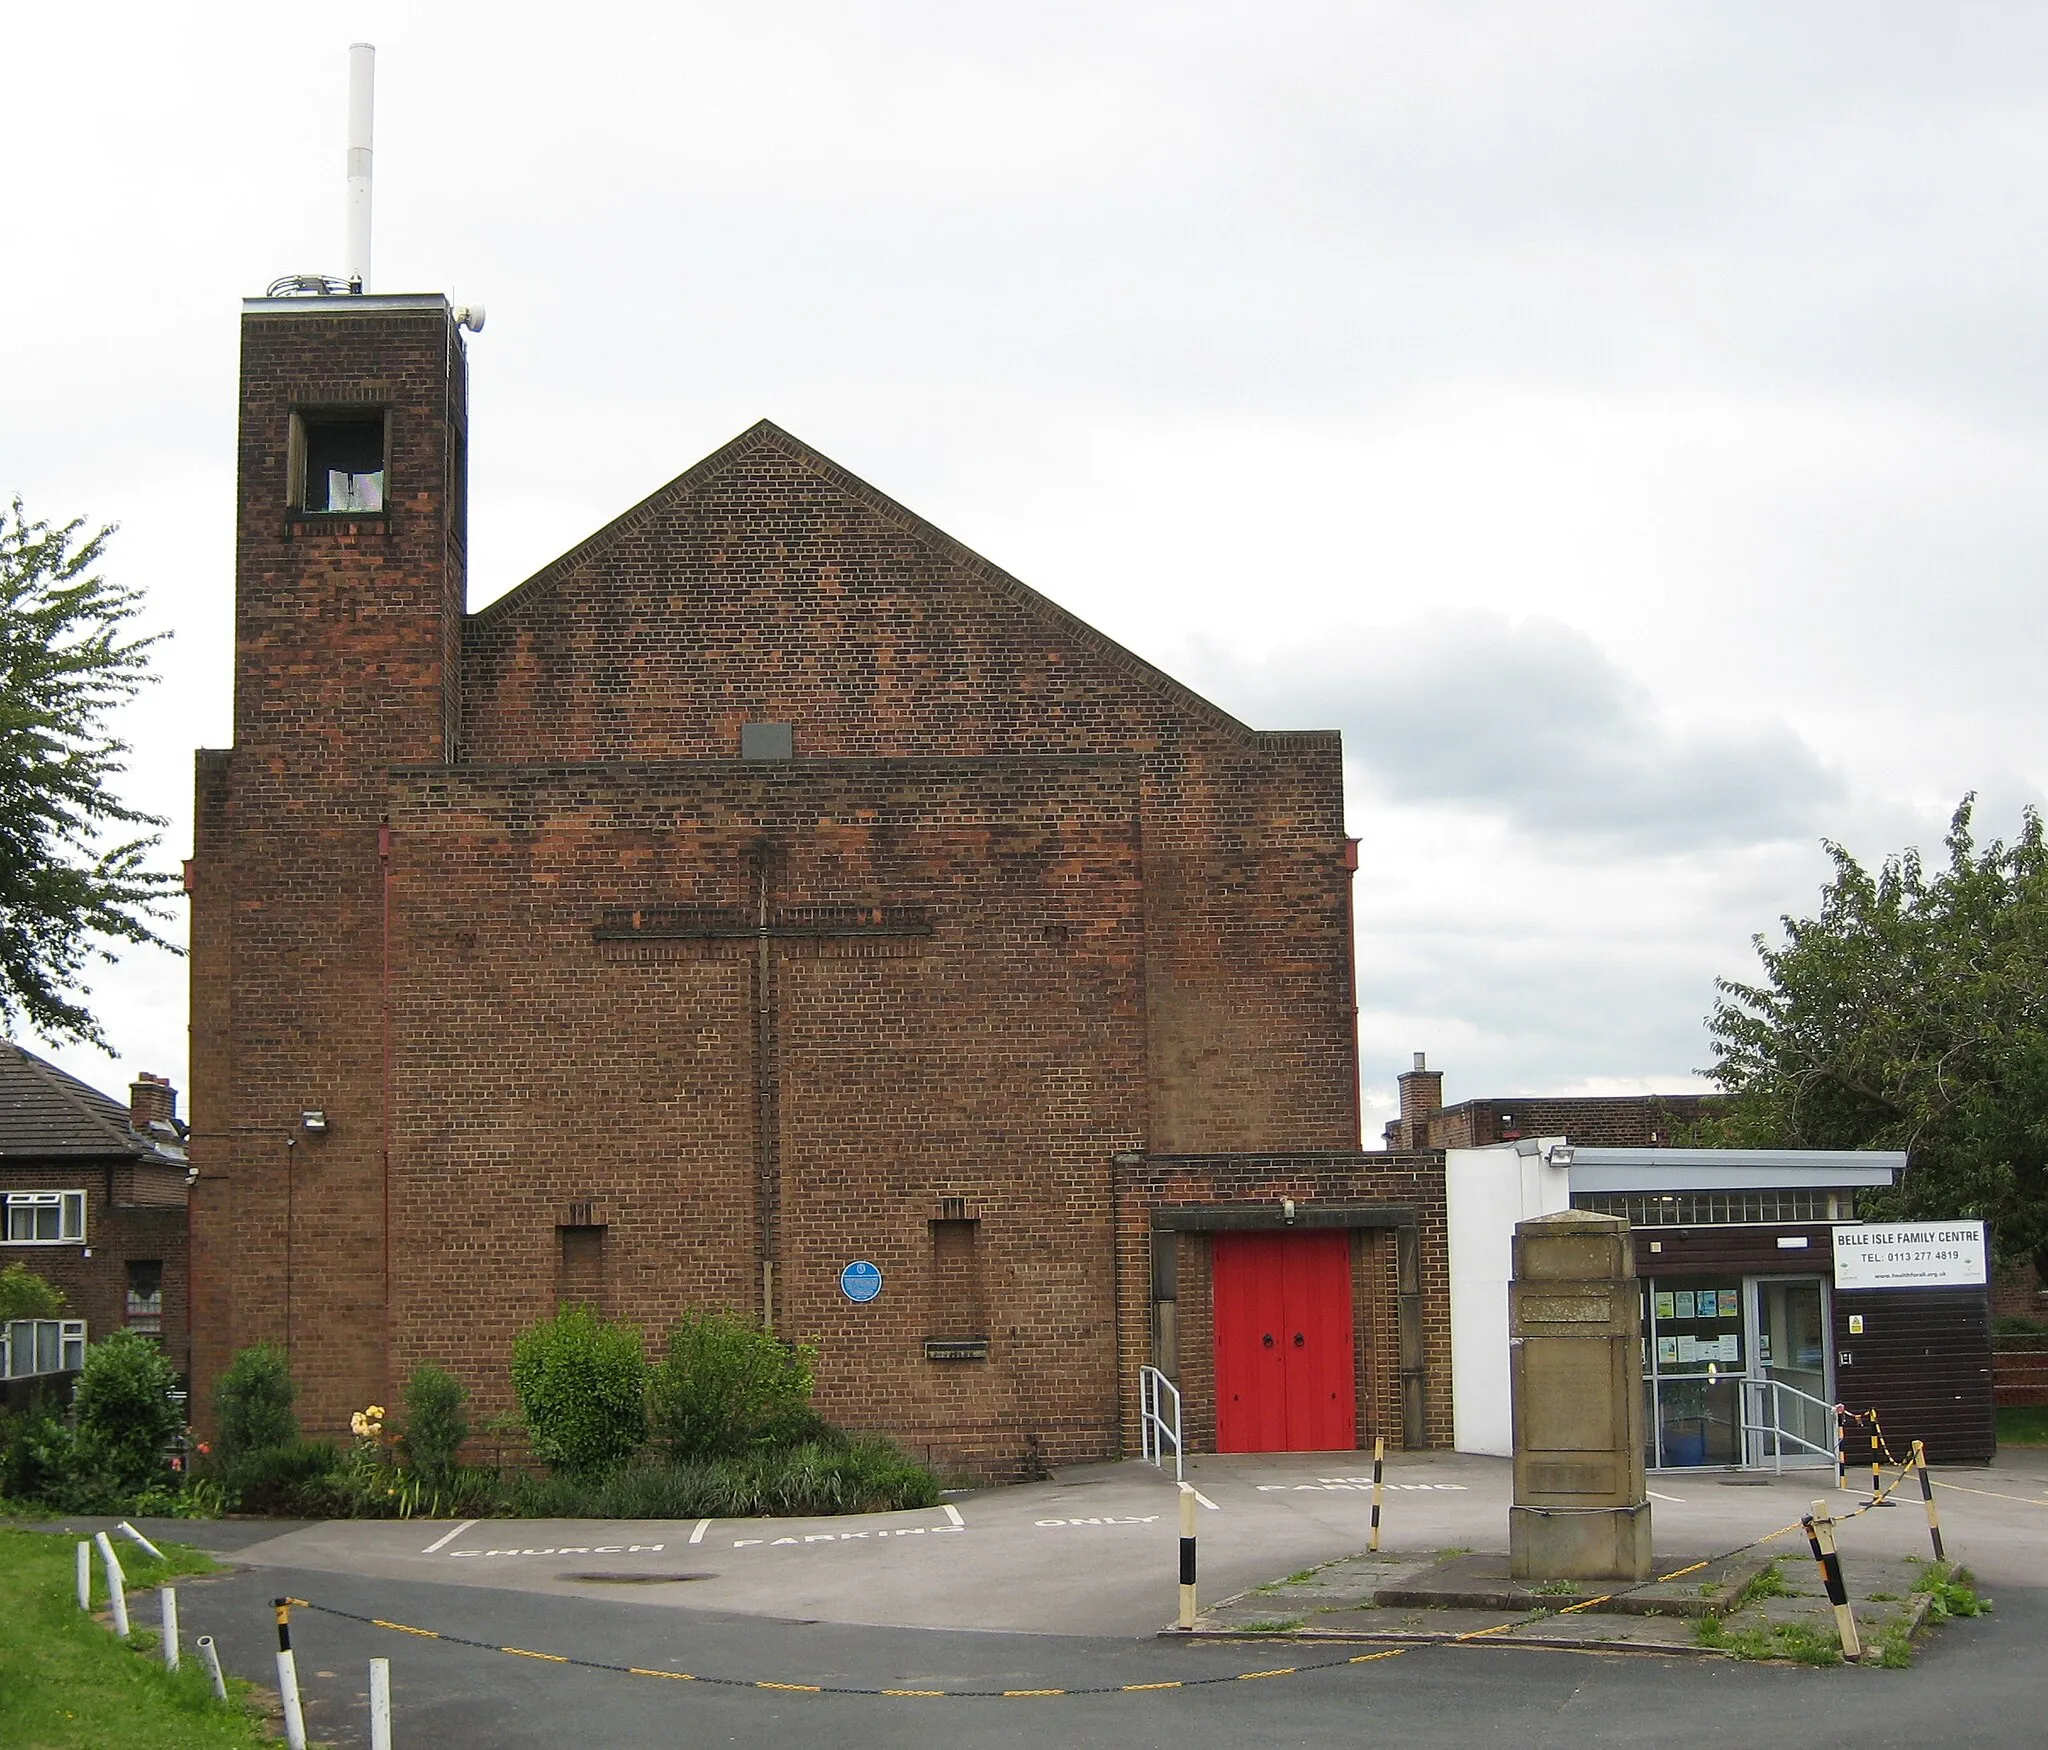 Photo showing: St John & St Barnabas Church, 175, Belle Isle Road, Leeds  LS10 3DN.  C of E parish church of Belle Isle and Hunslet. Anglo Catholic.  Brick built 1938 to replace two churches now demolished.  Adjacent is the Belle Isle Family Centre.